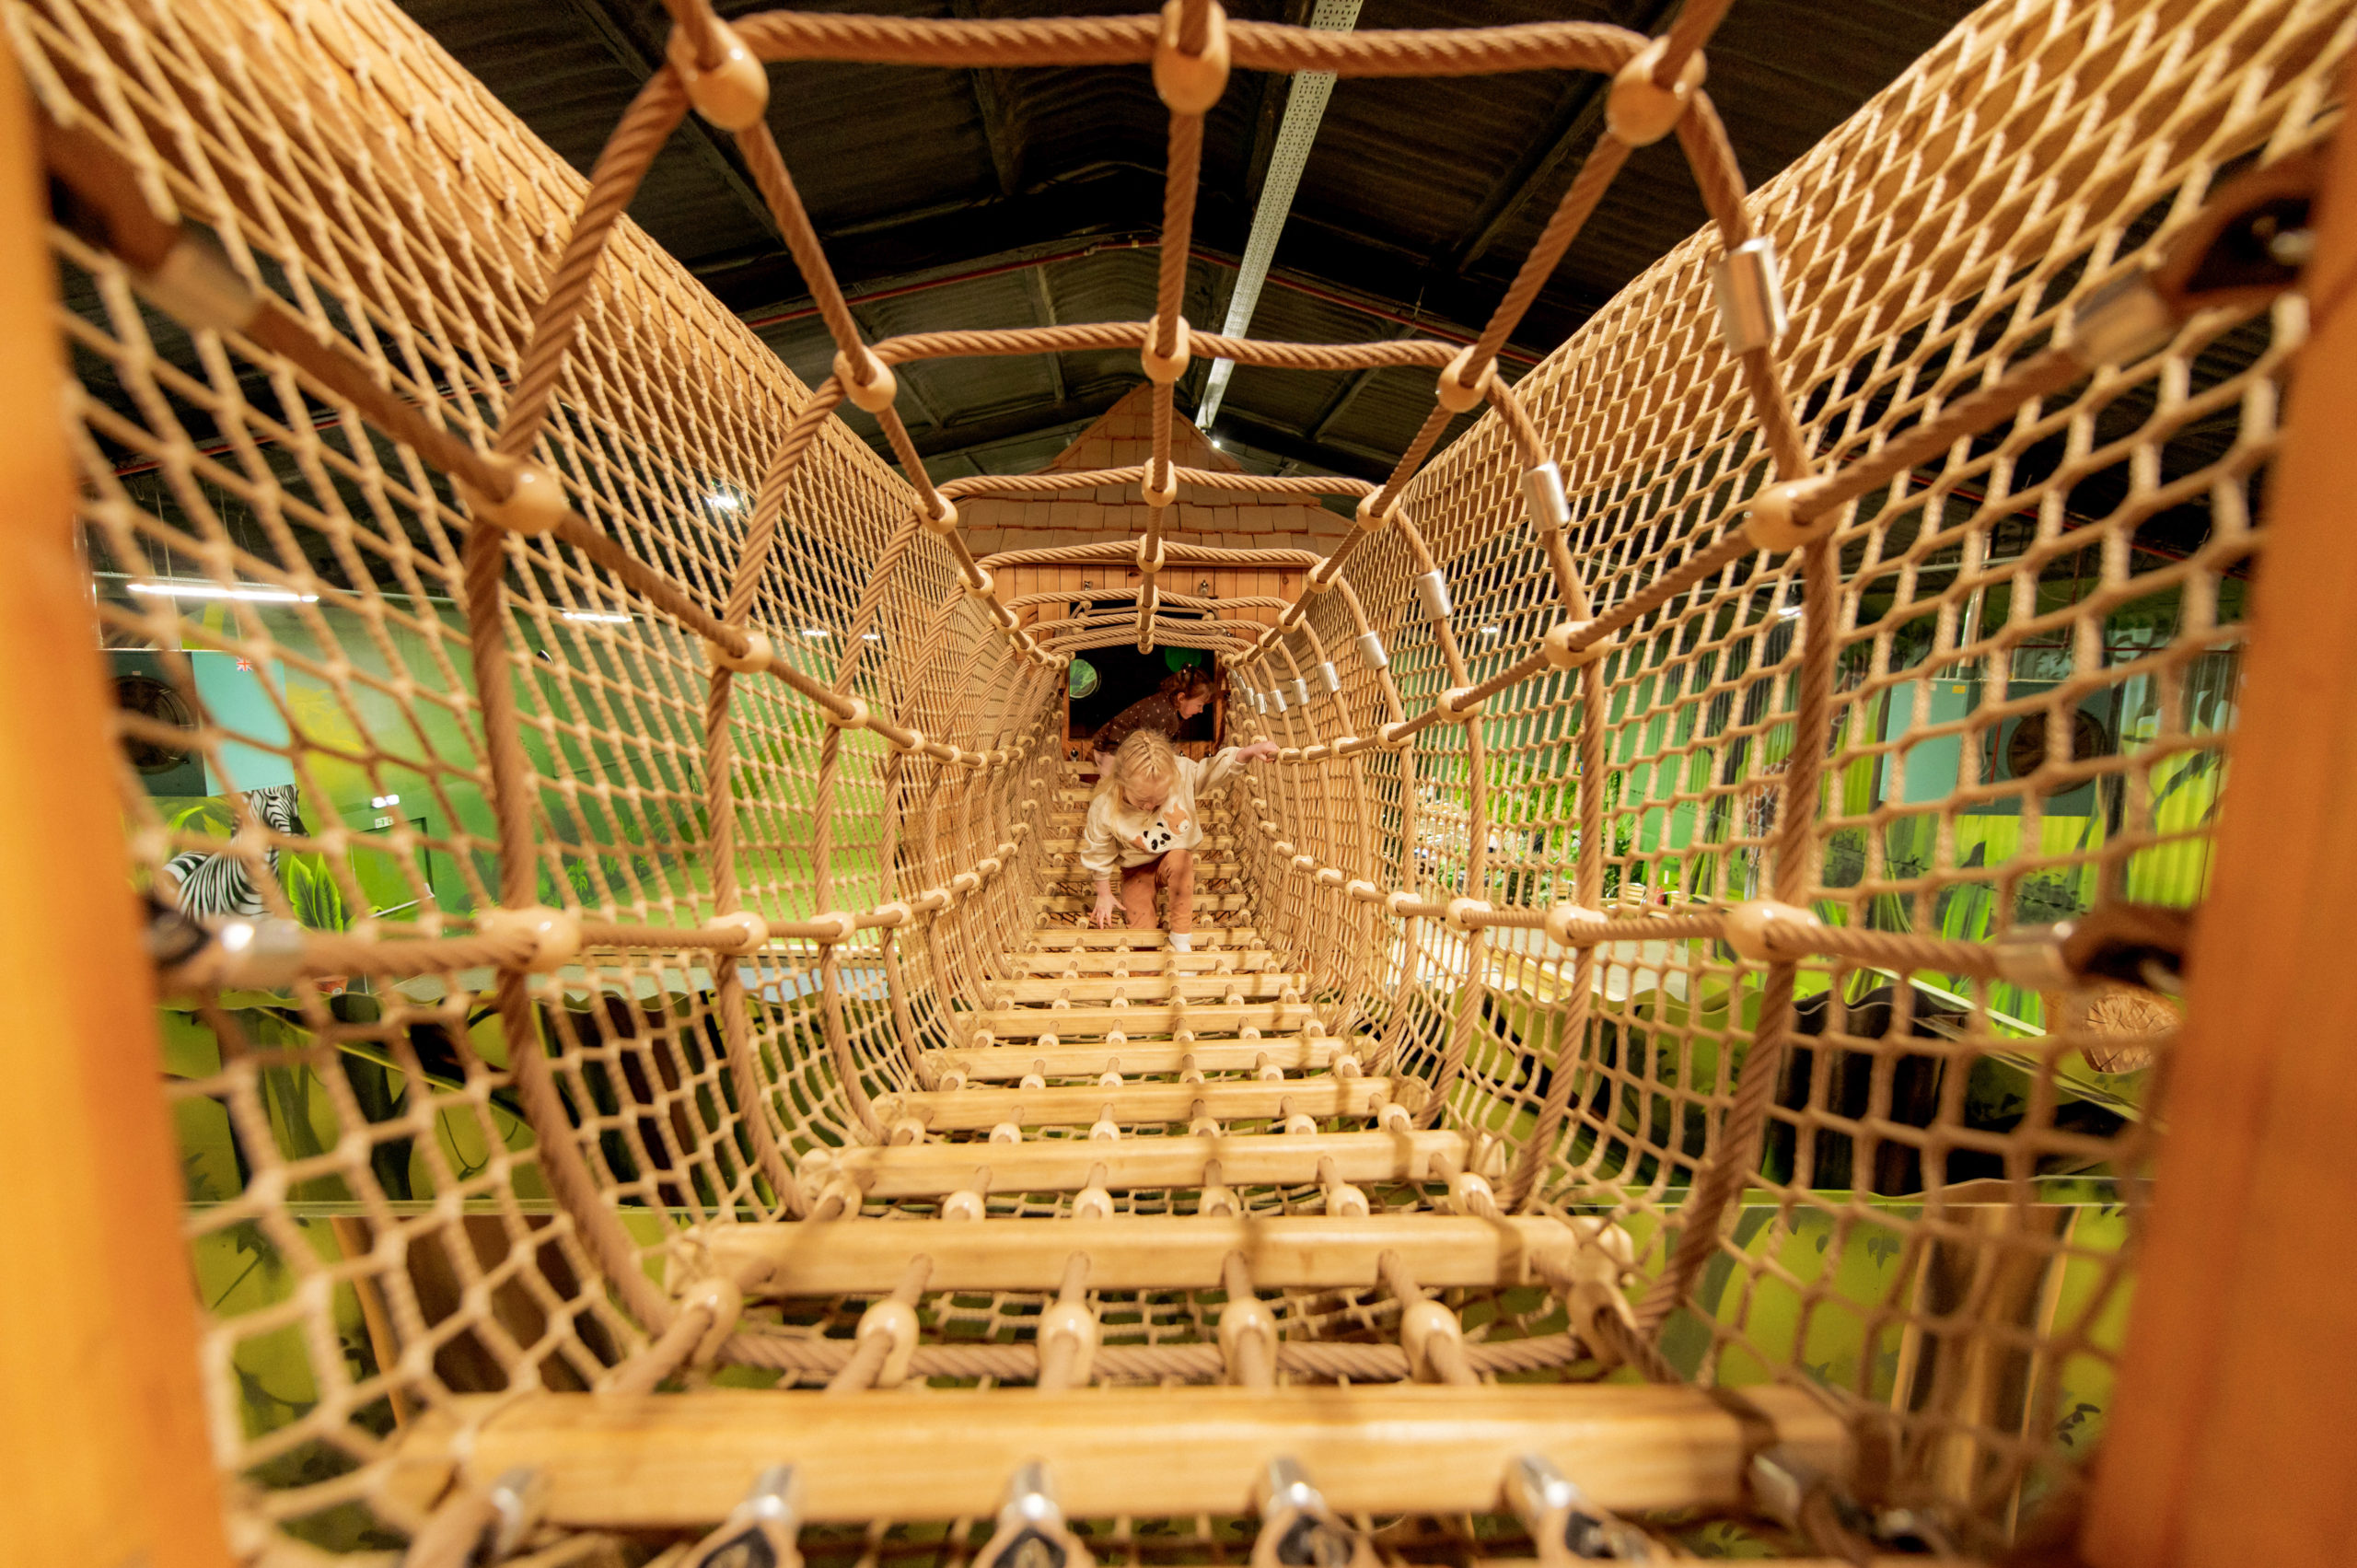 The interior view of a rope bridge inside a jungle-themed playground, showcasing its intricate woven structure and a child walking on it.